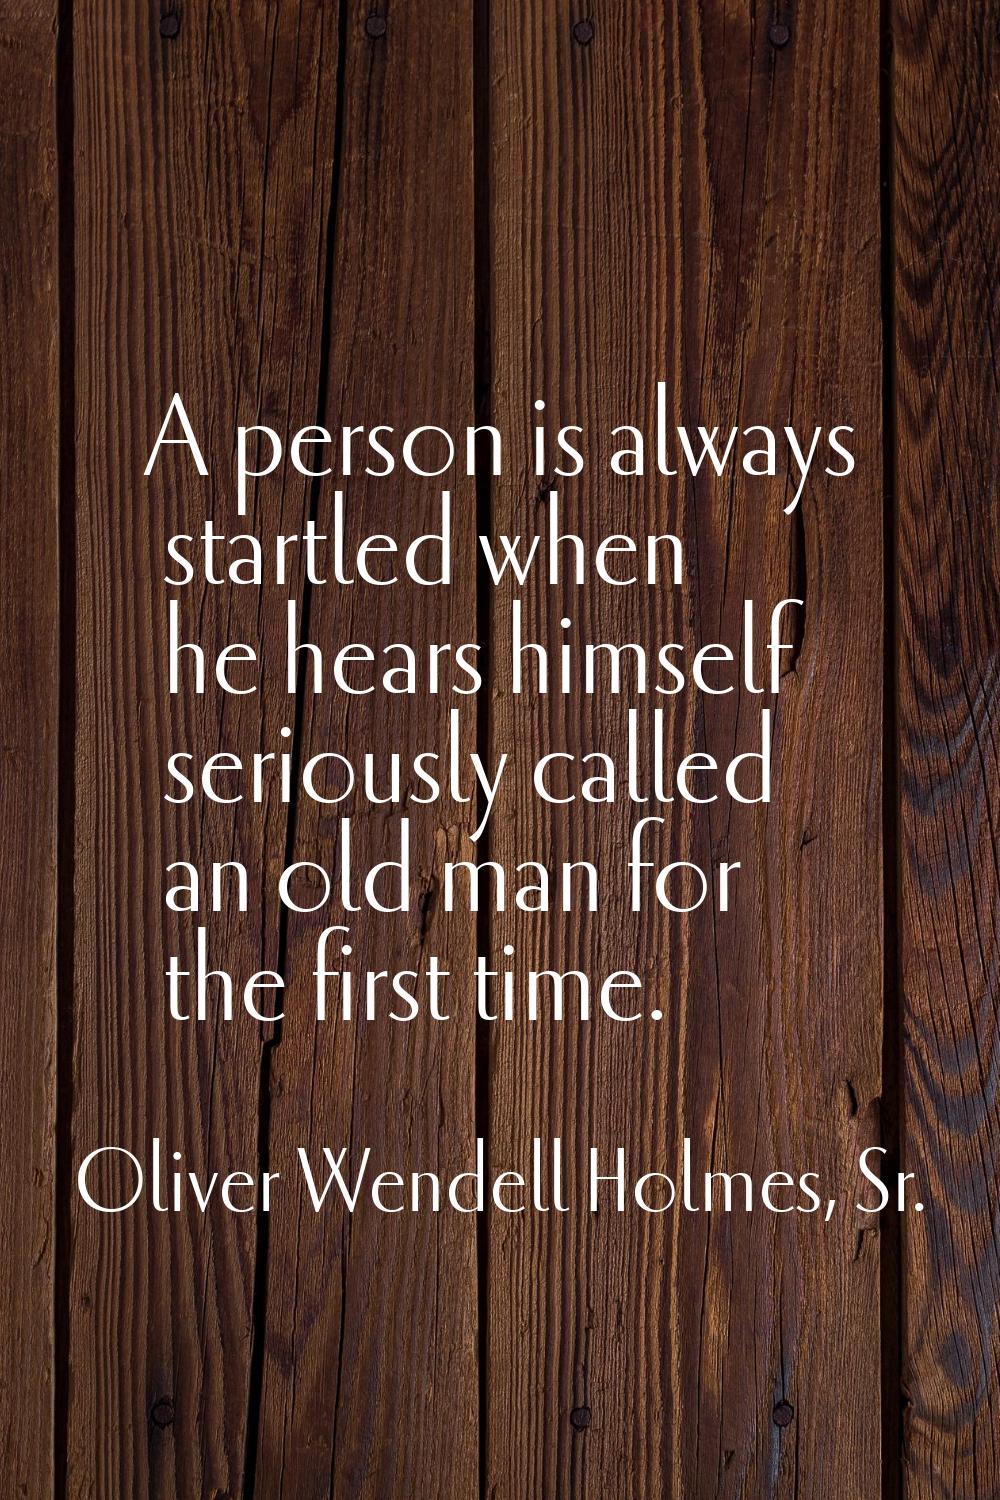 A person is always startled when he hears himself seriously called an old man for the first time.